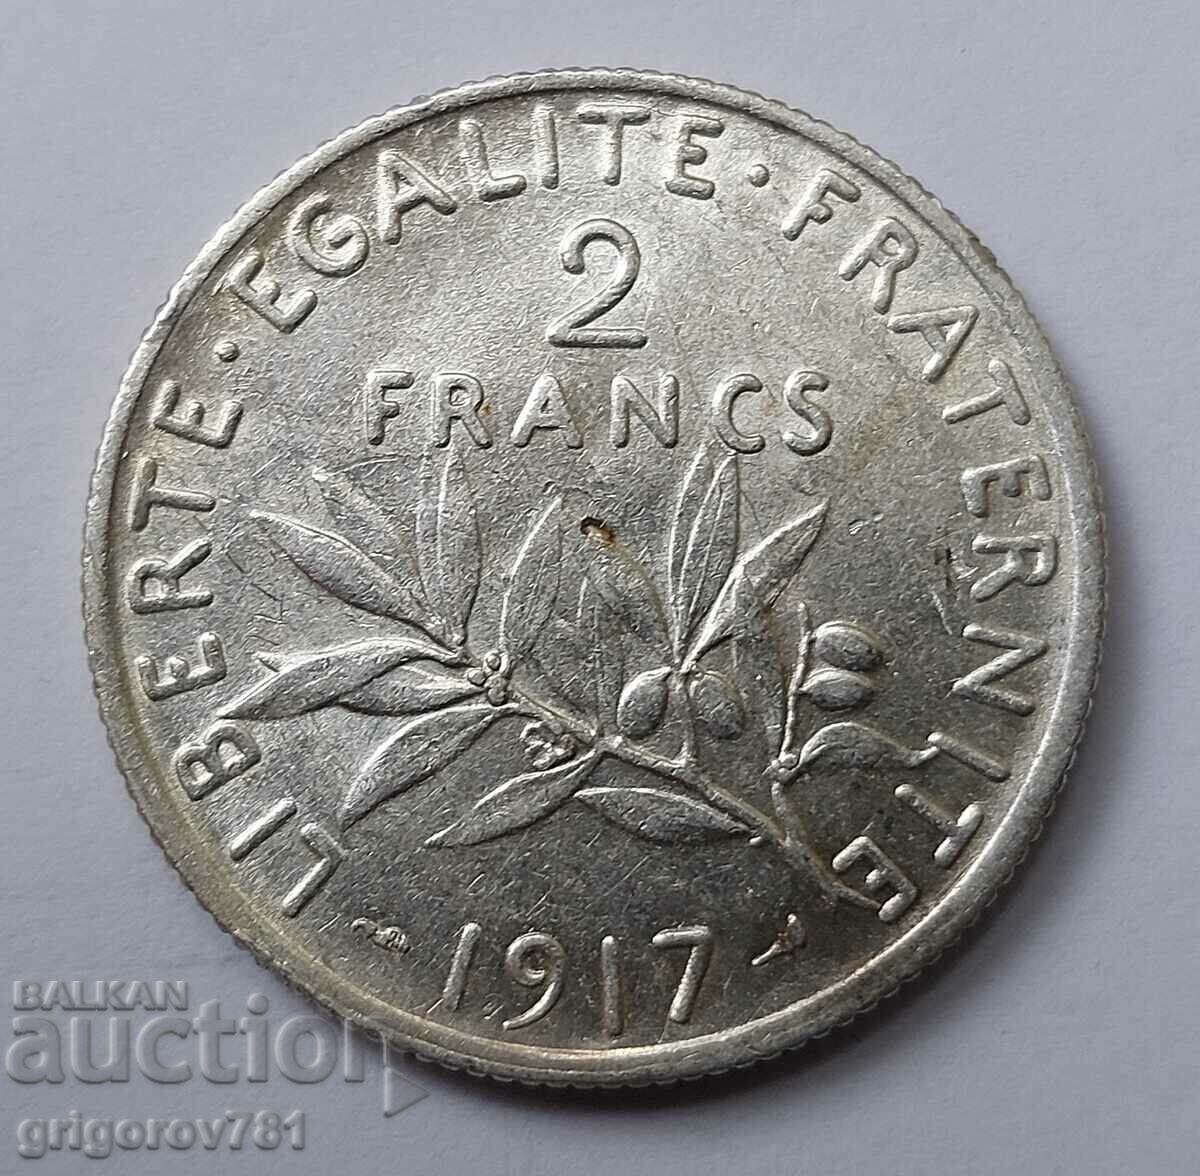 2 Francs Silver France 1917 - Silver Coin #37